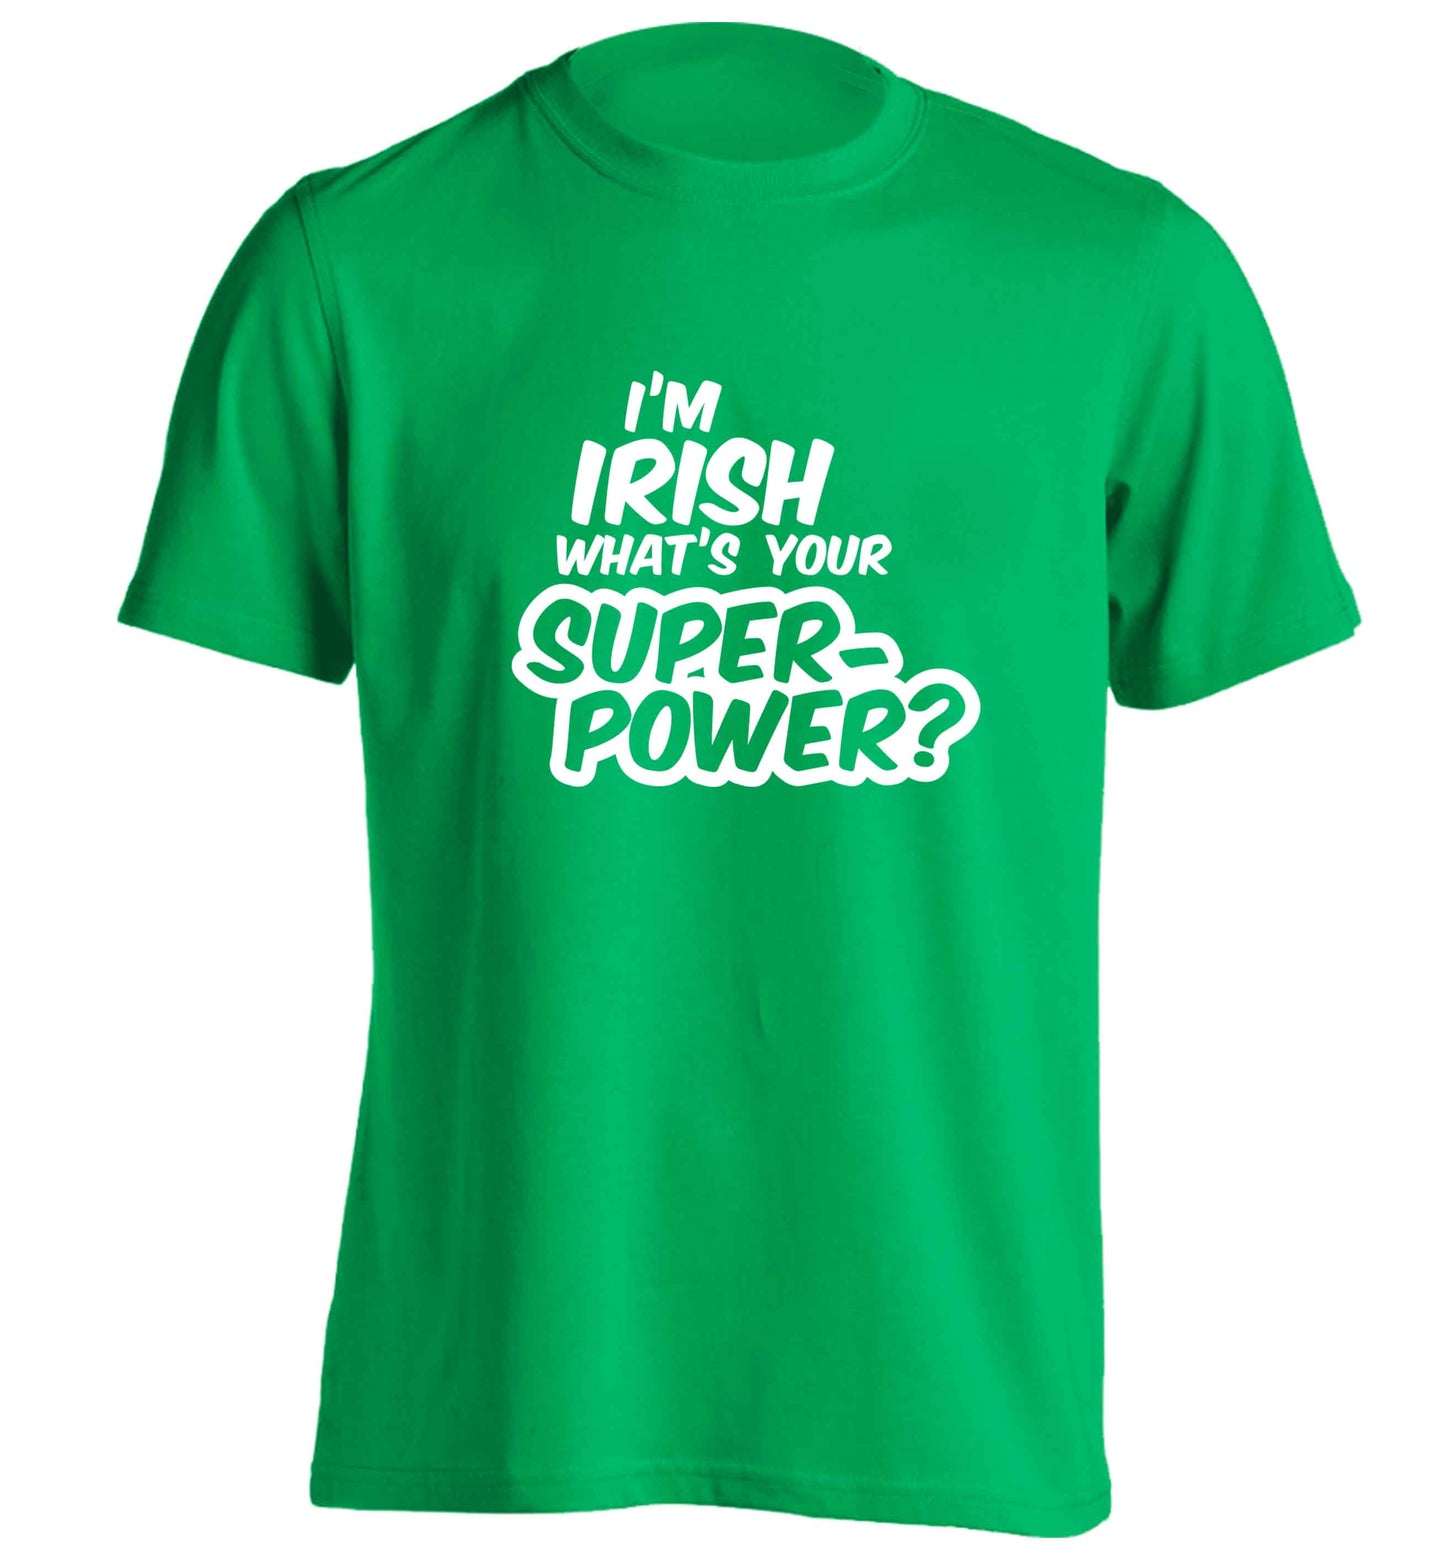 I'm Irish what's your superpower? adults unisex green Tshirt 2XL